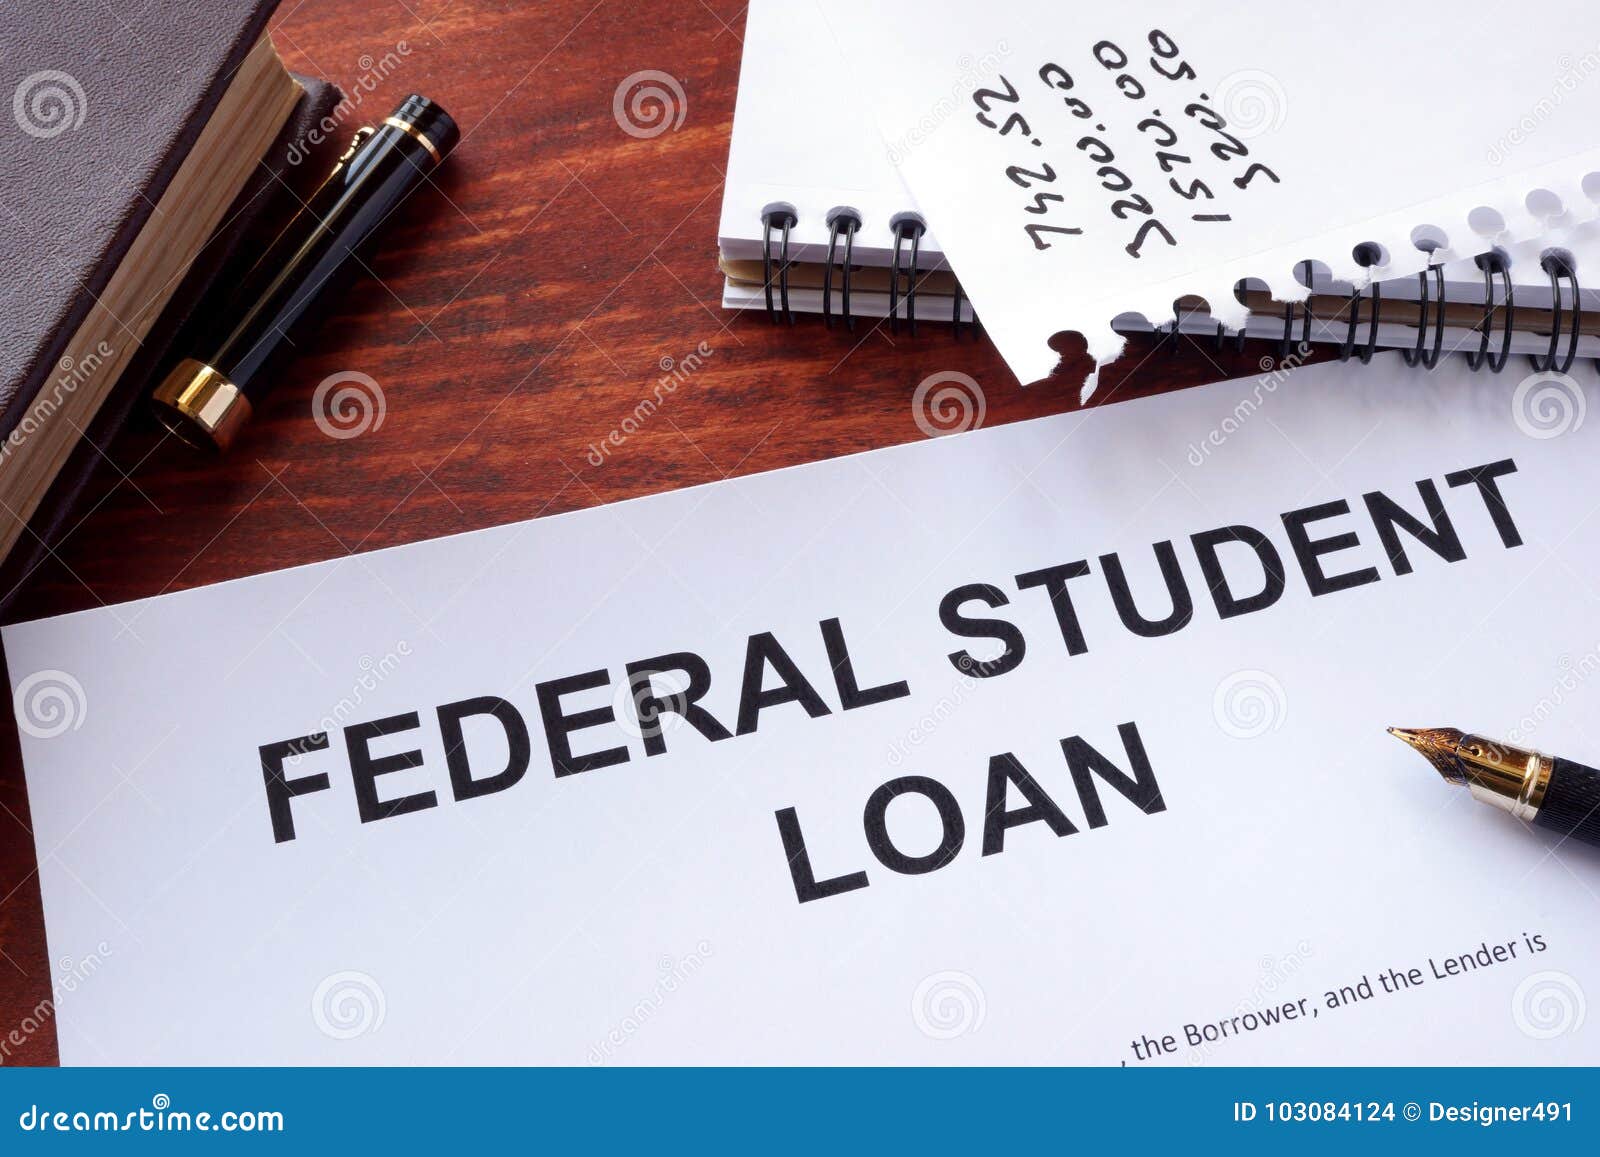 federal student loan form.